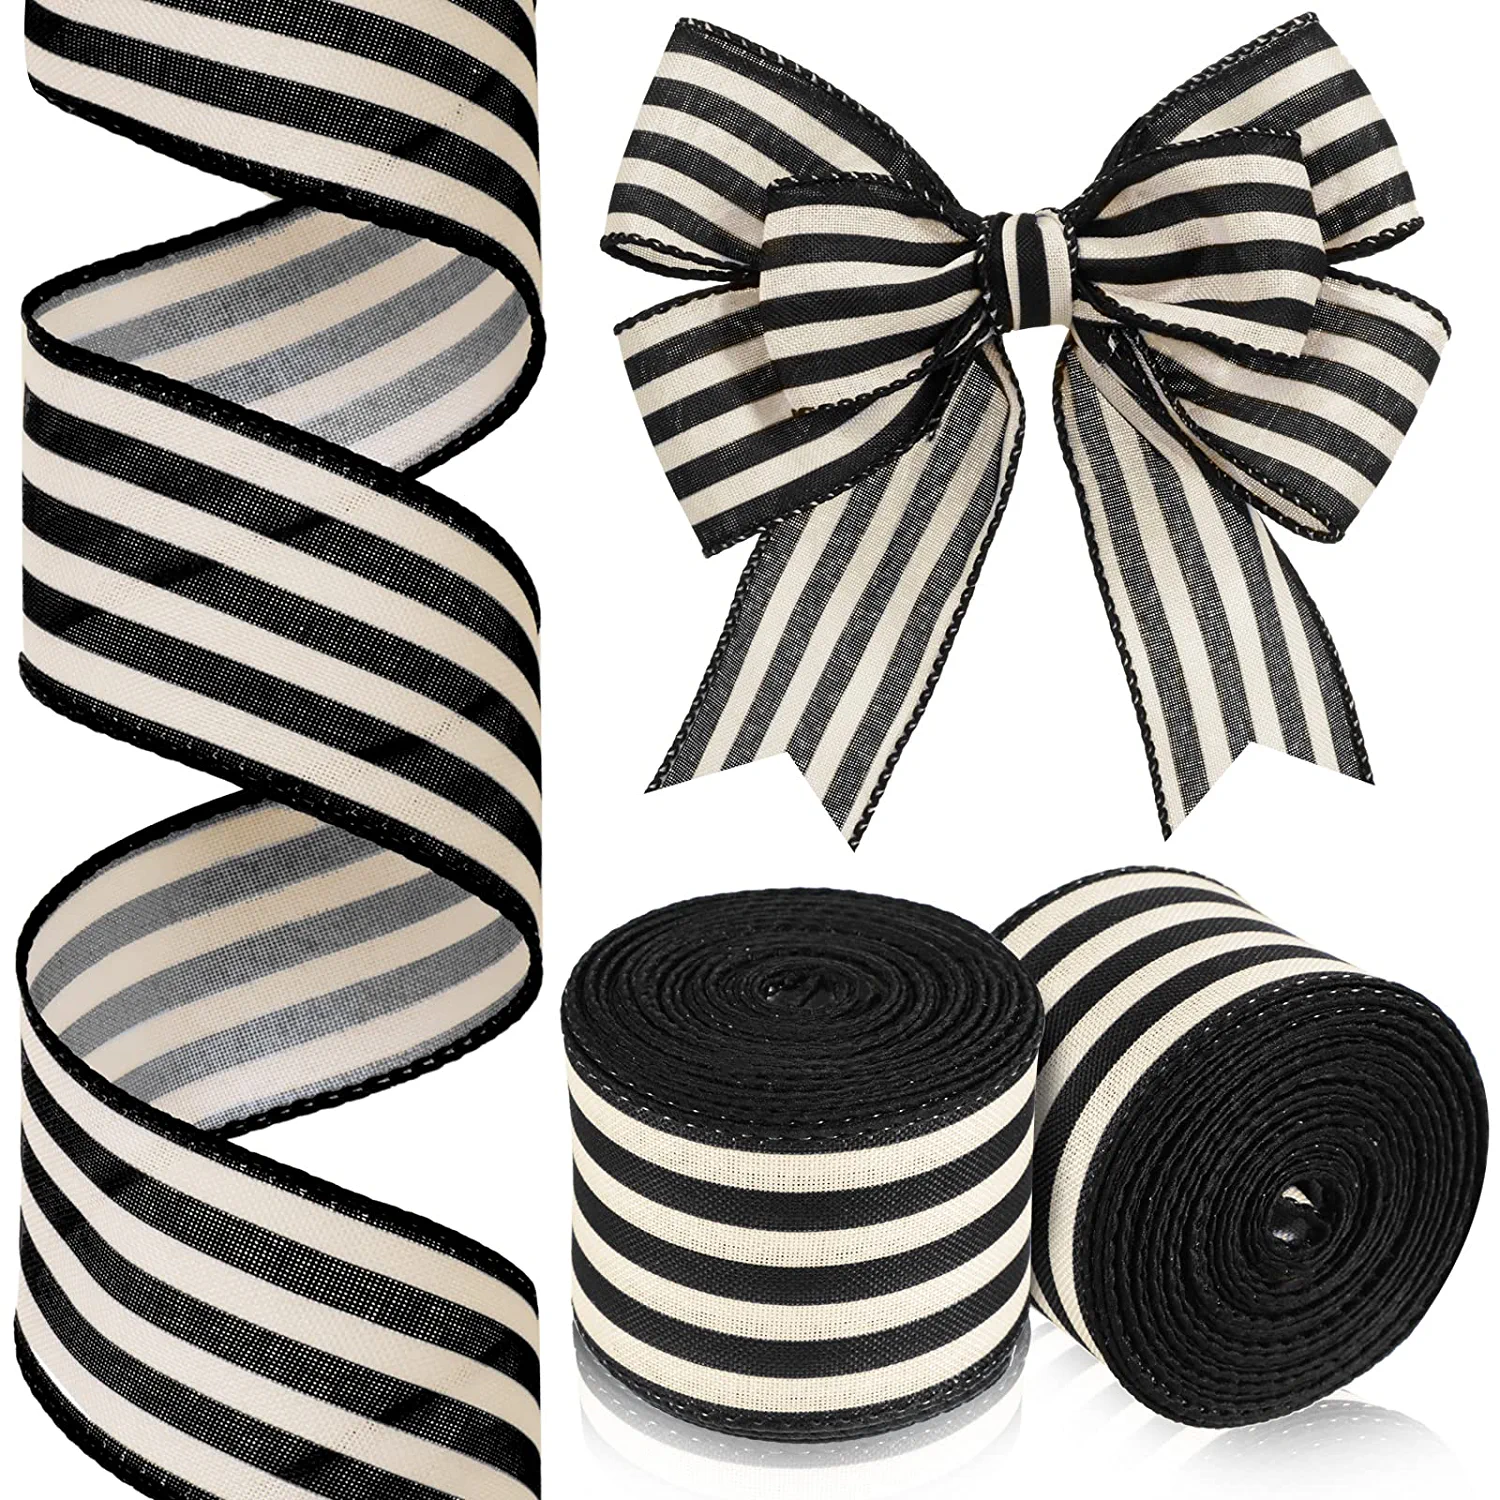 2 Rolls 20 Yard Black And White Stripes Wired Edge Ribbon Rustic Ivory R... - $27.99